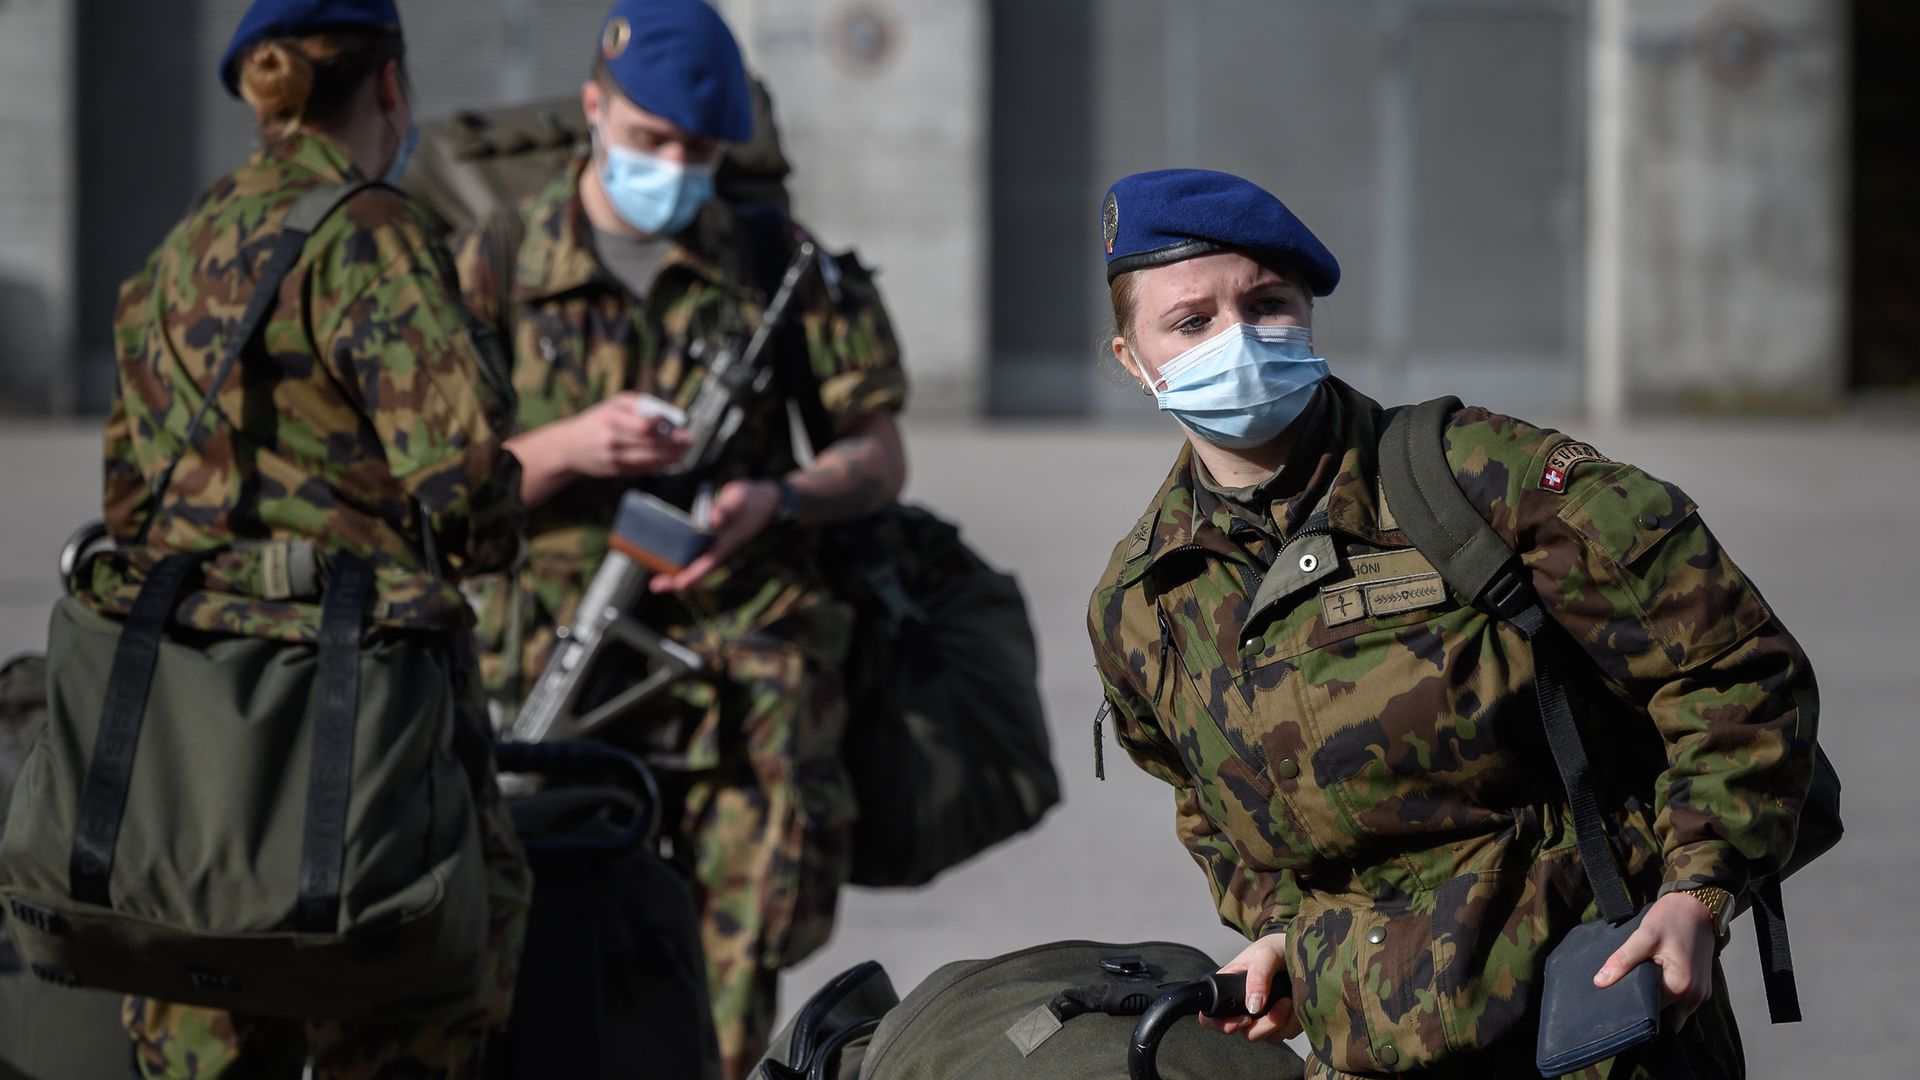 Swiss army reservists wearing protective face masks arrive at Moudon military base on November 8, 2020 - Credit: Photo by Fabrice Coffrini/AFP via Getty Images